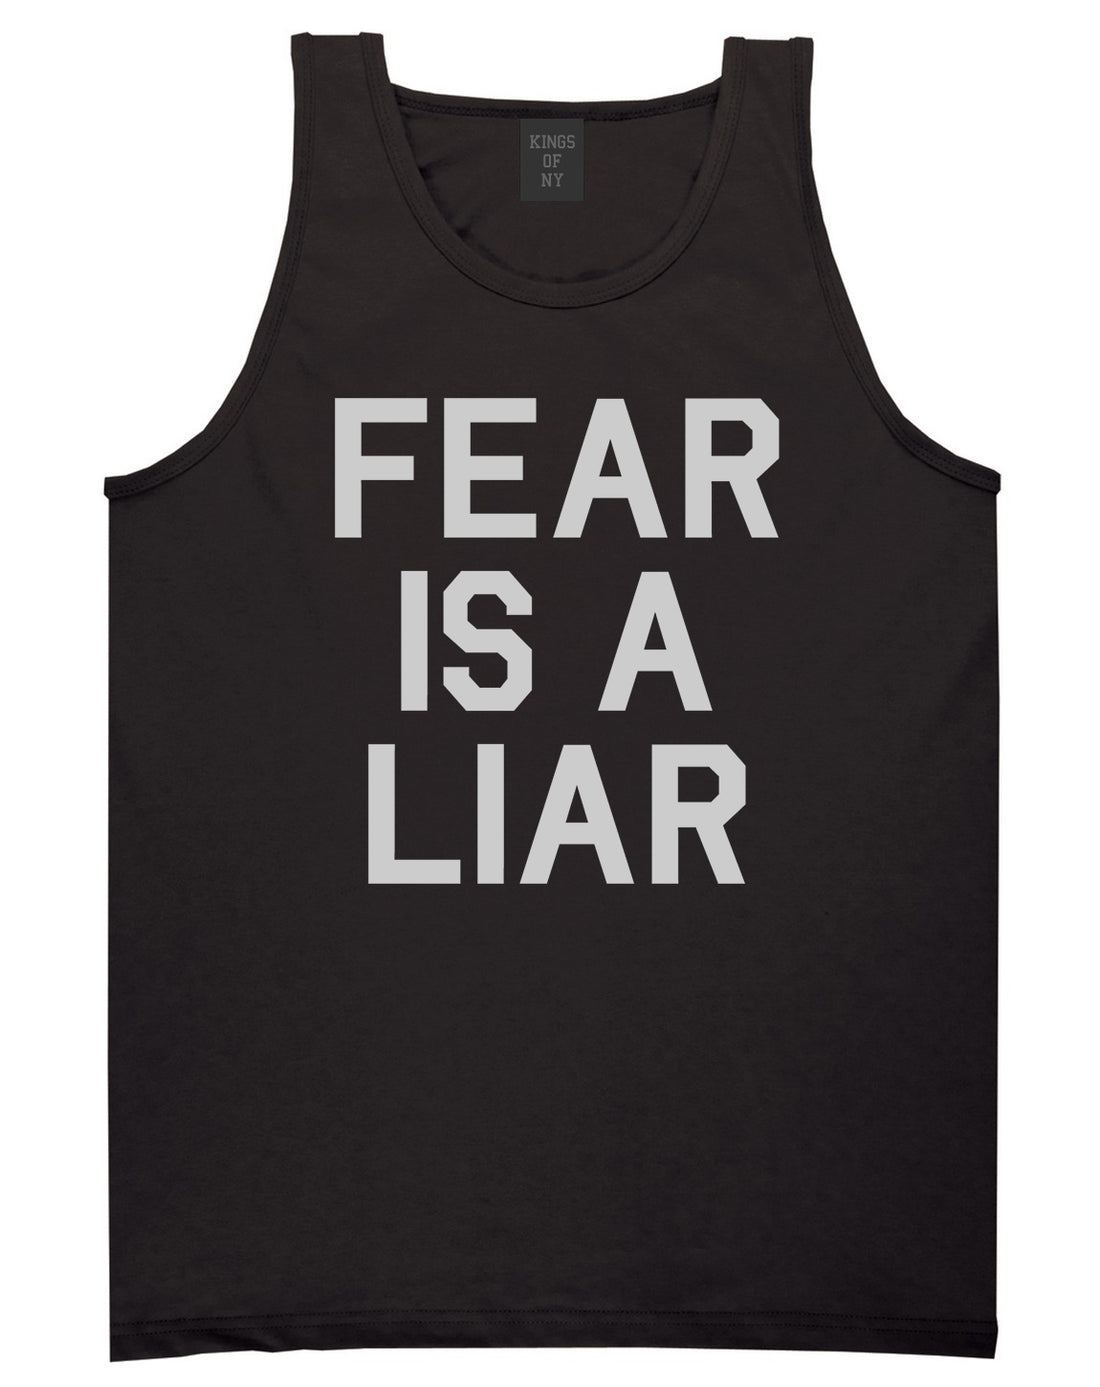 Fear Is A Liar Motivational Mens Tank Top Shirt Black by Kings Of NY